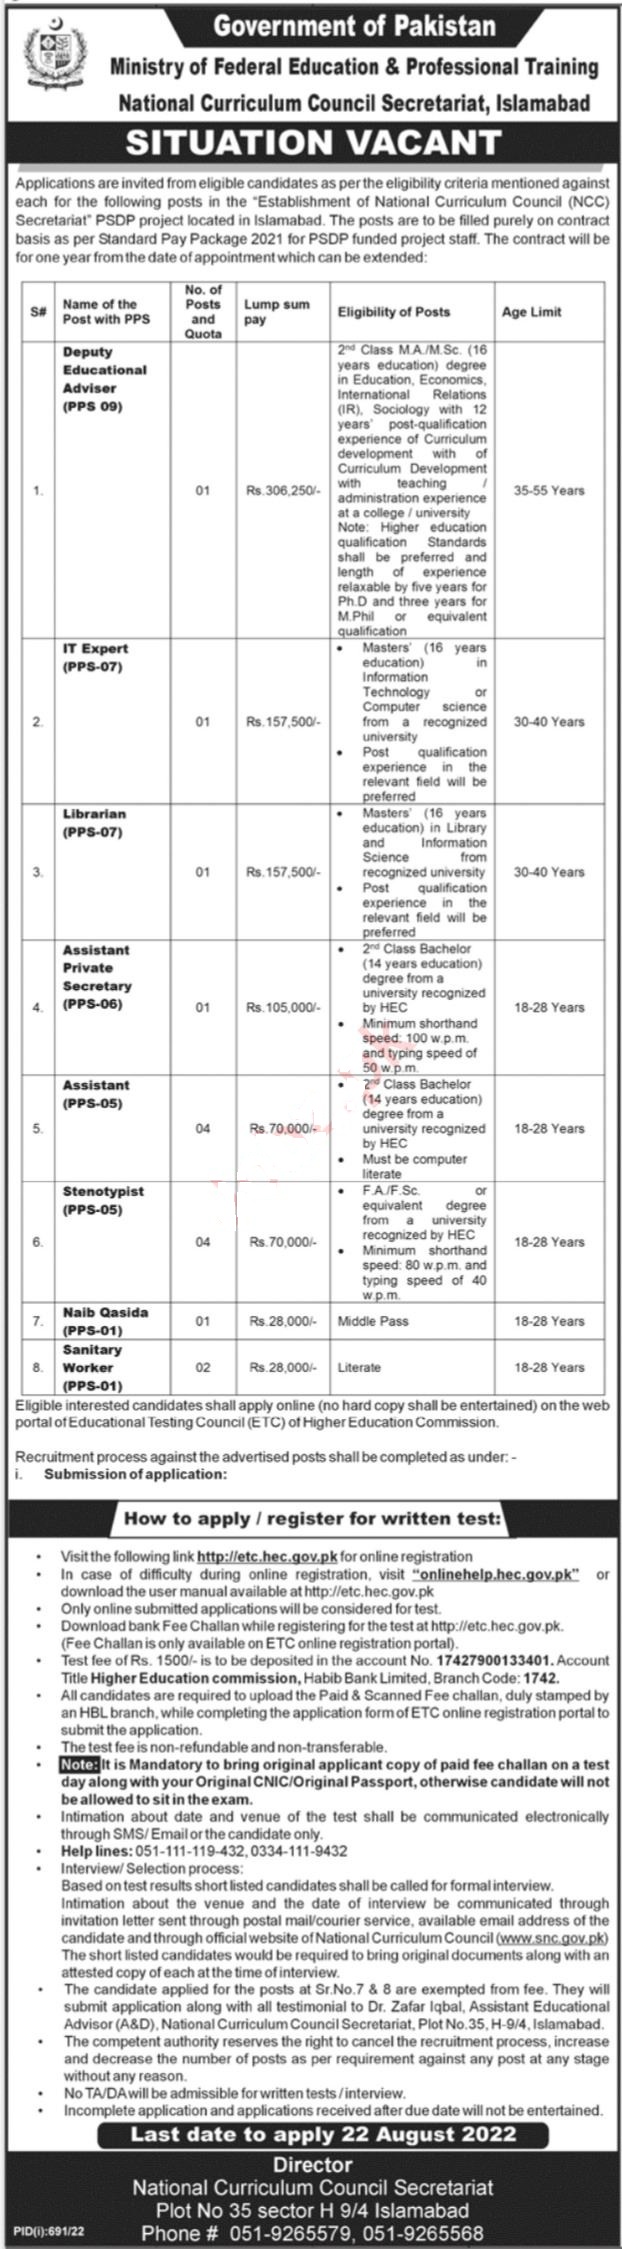 ministry of federal education and professional training jobs